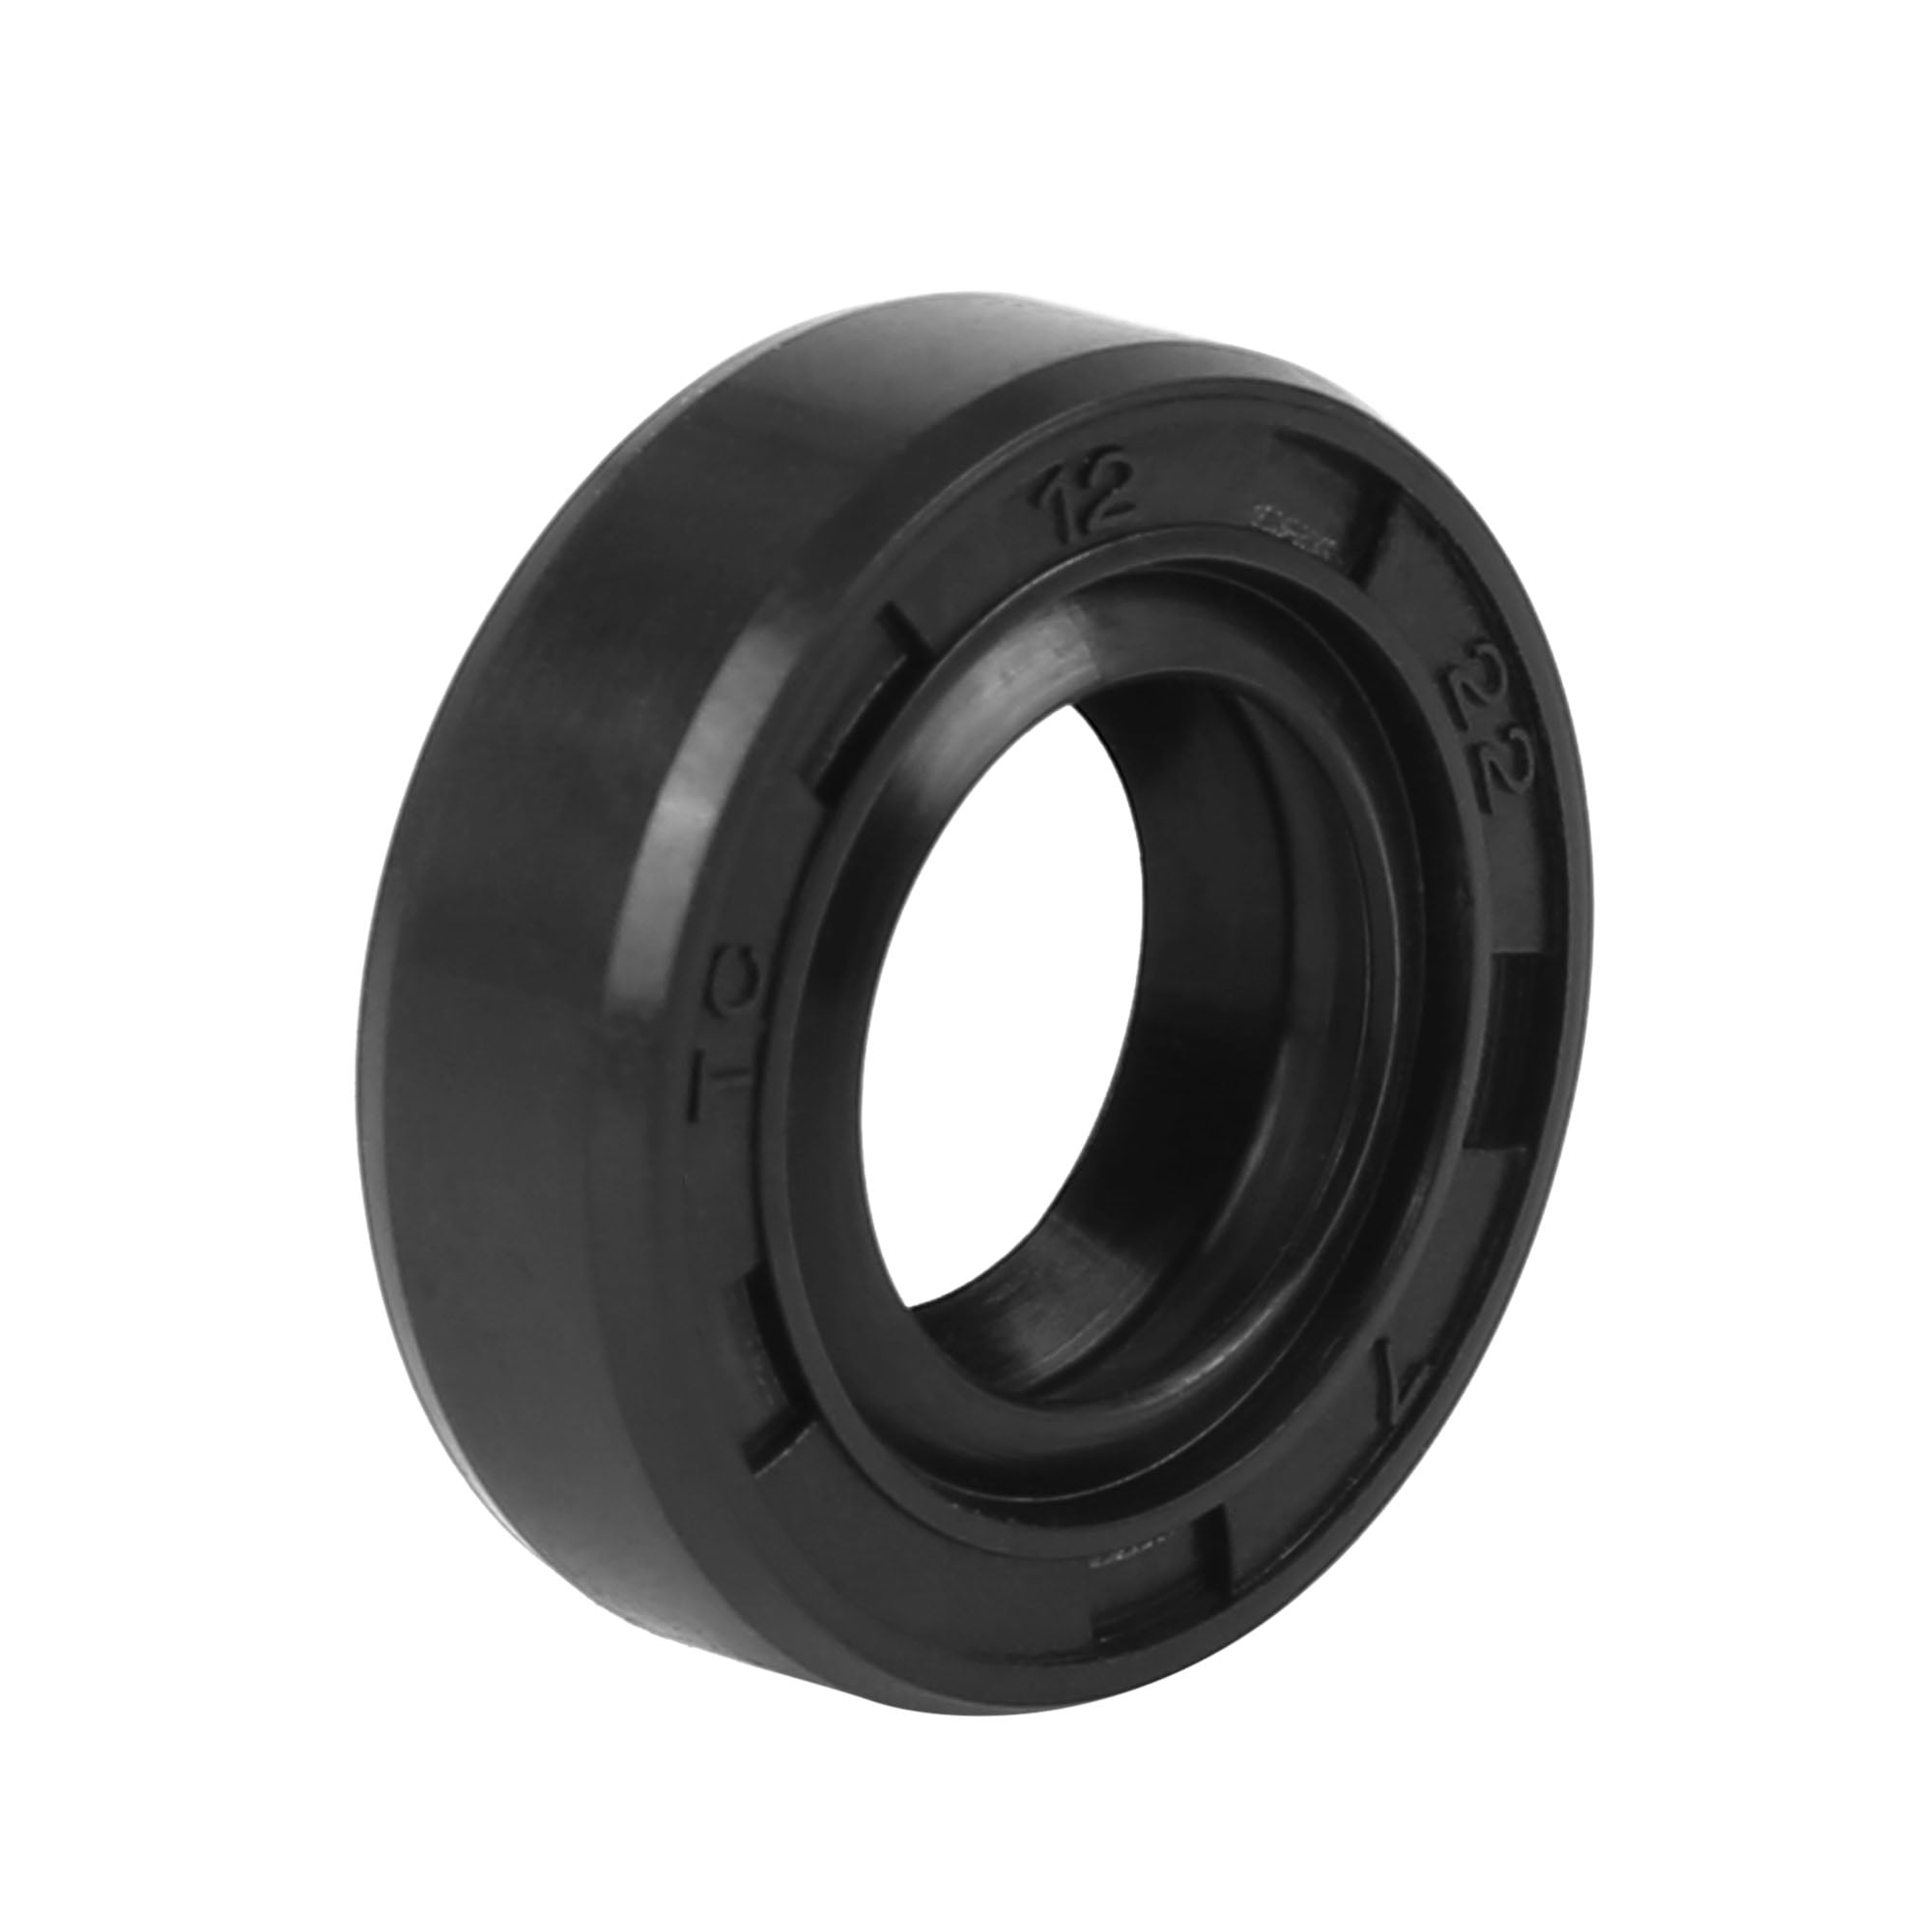 12mm id x 22mm od x 7mm wide,12x22x7,Silicone Rubber TC Oil  Seal two contact 